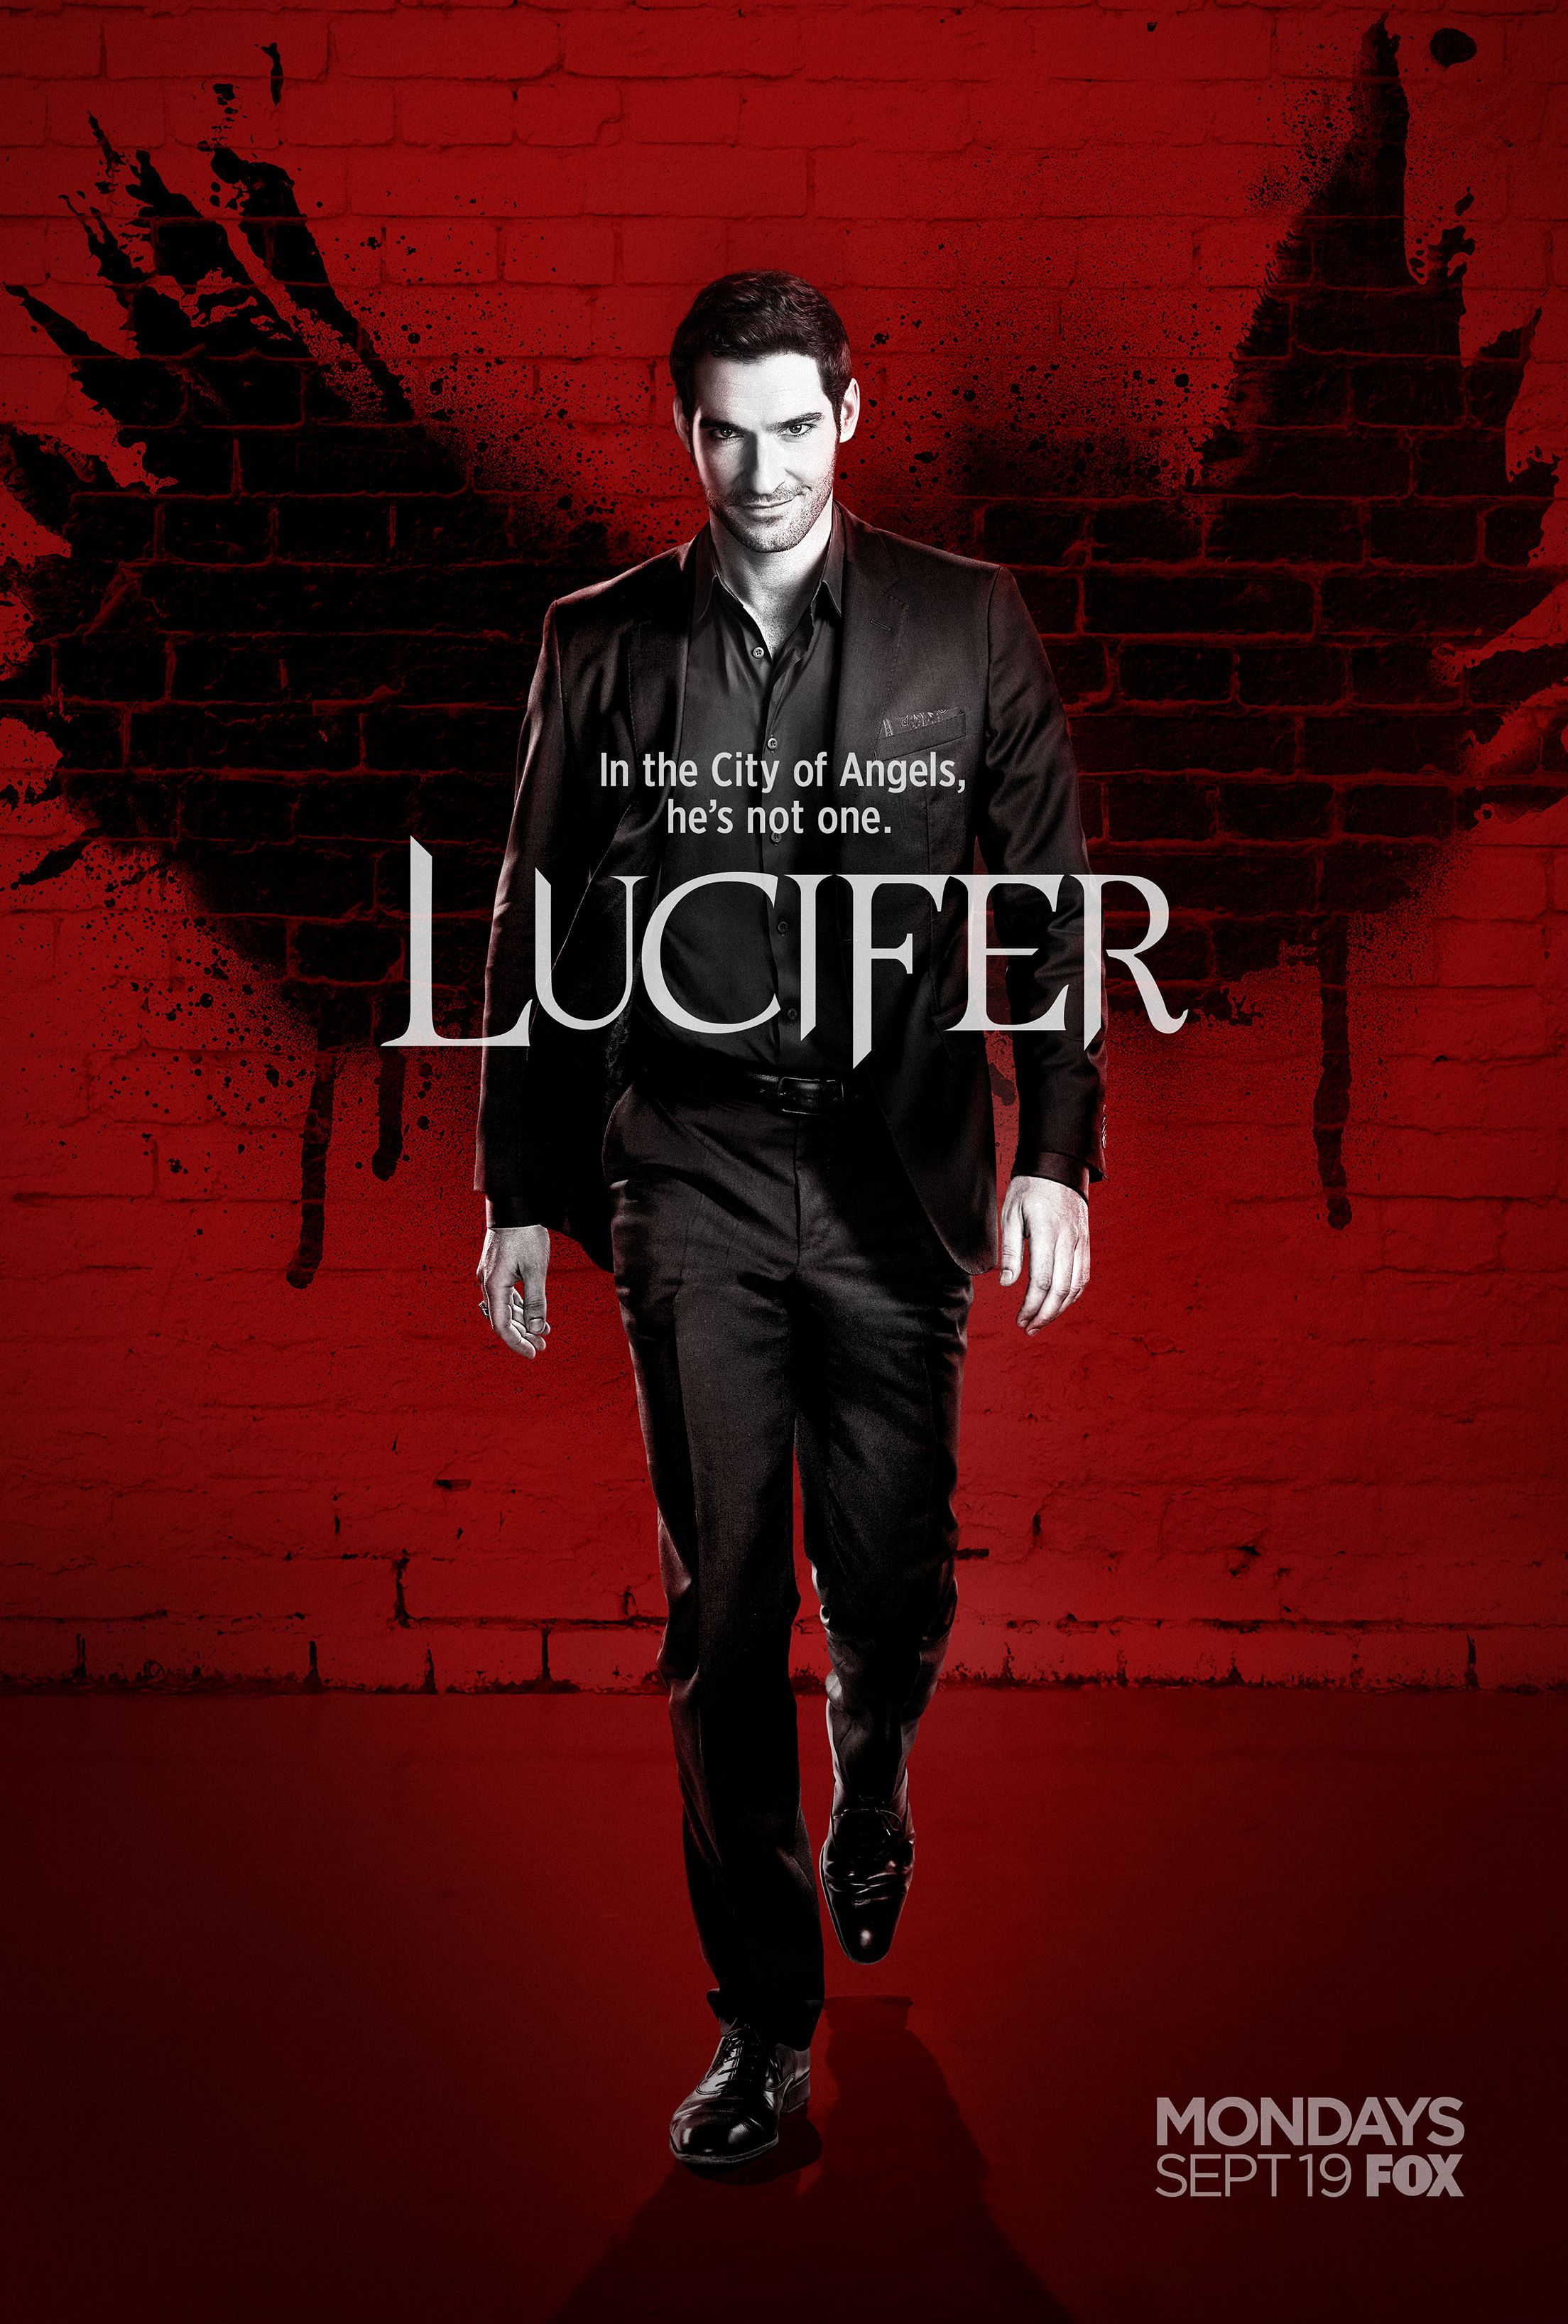 Official poster for season 2 of Lucifer